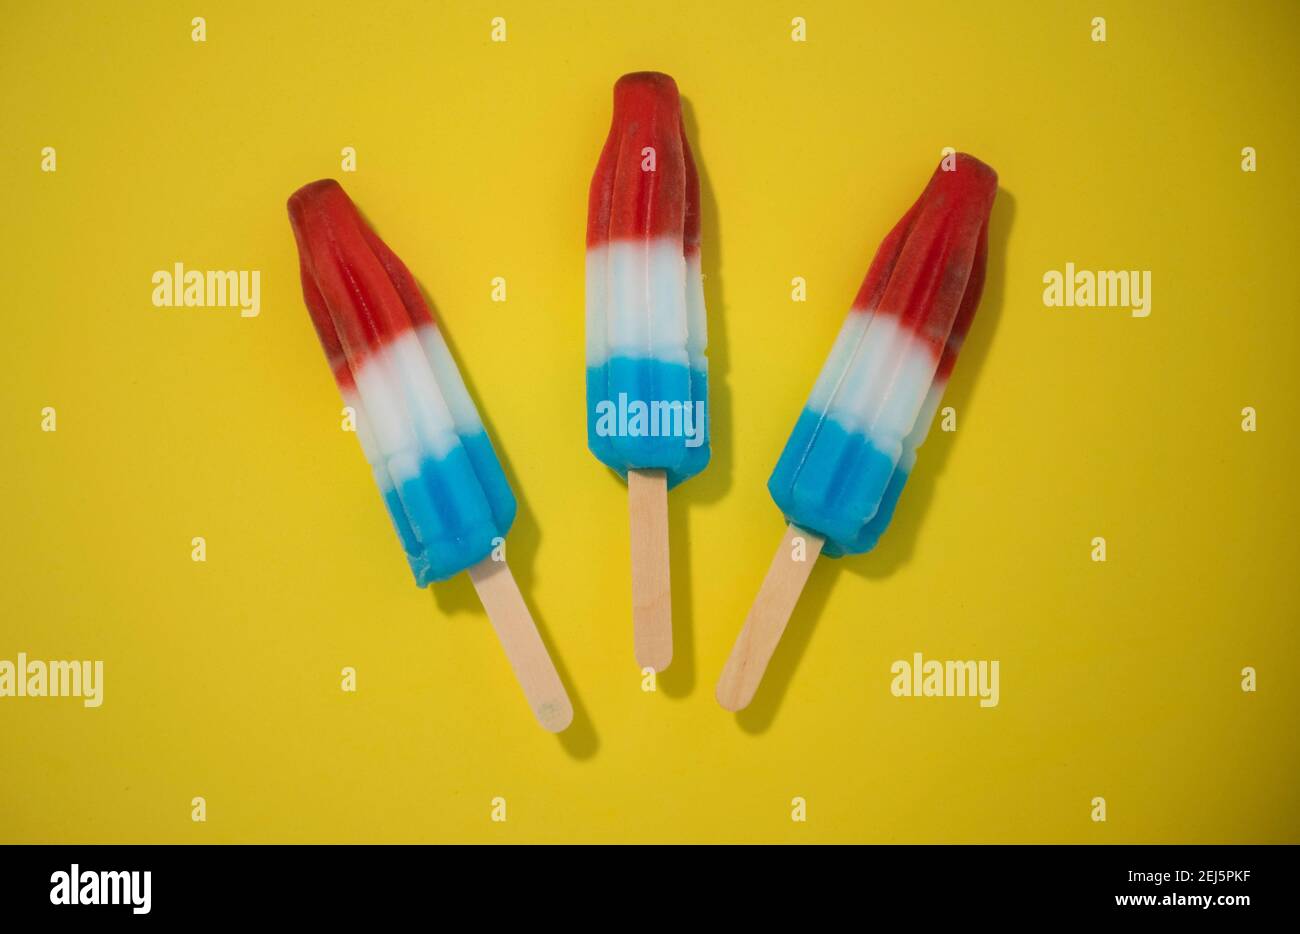 Red, White and Blue Novelty ice cream bombpop shot on yellow background, stop action animation exploding like fireworks. Series 2 of 8. Stock Photo